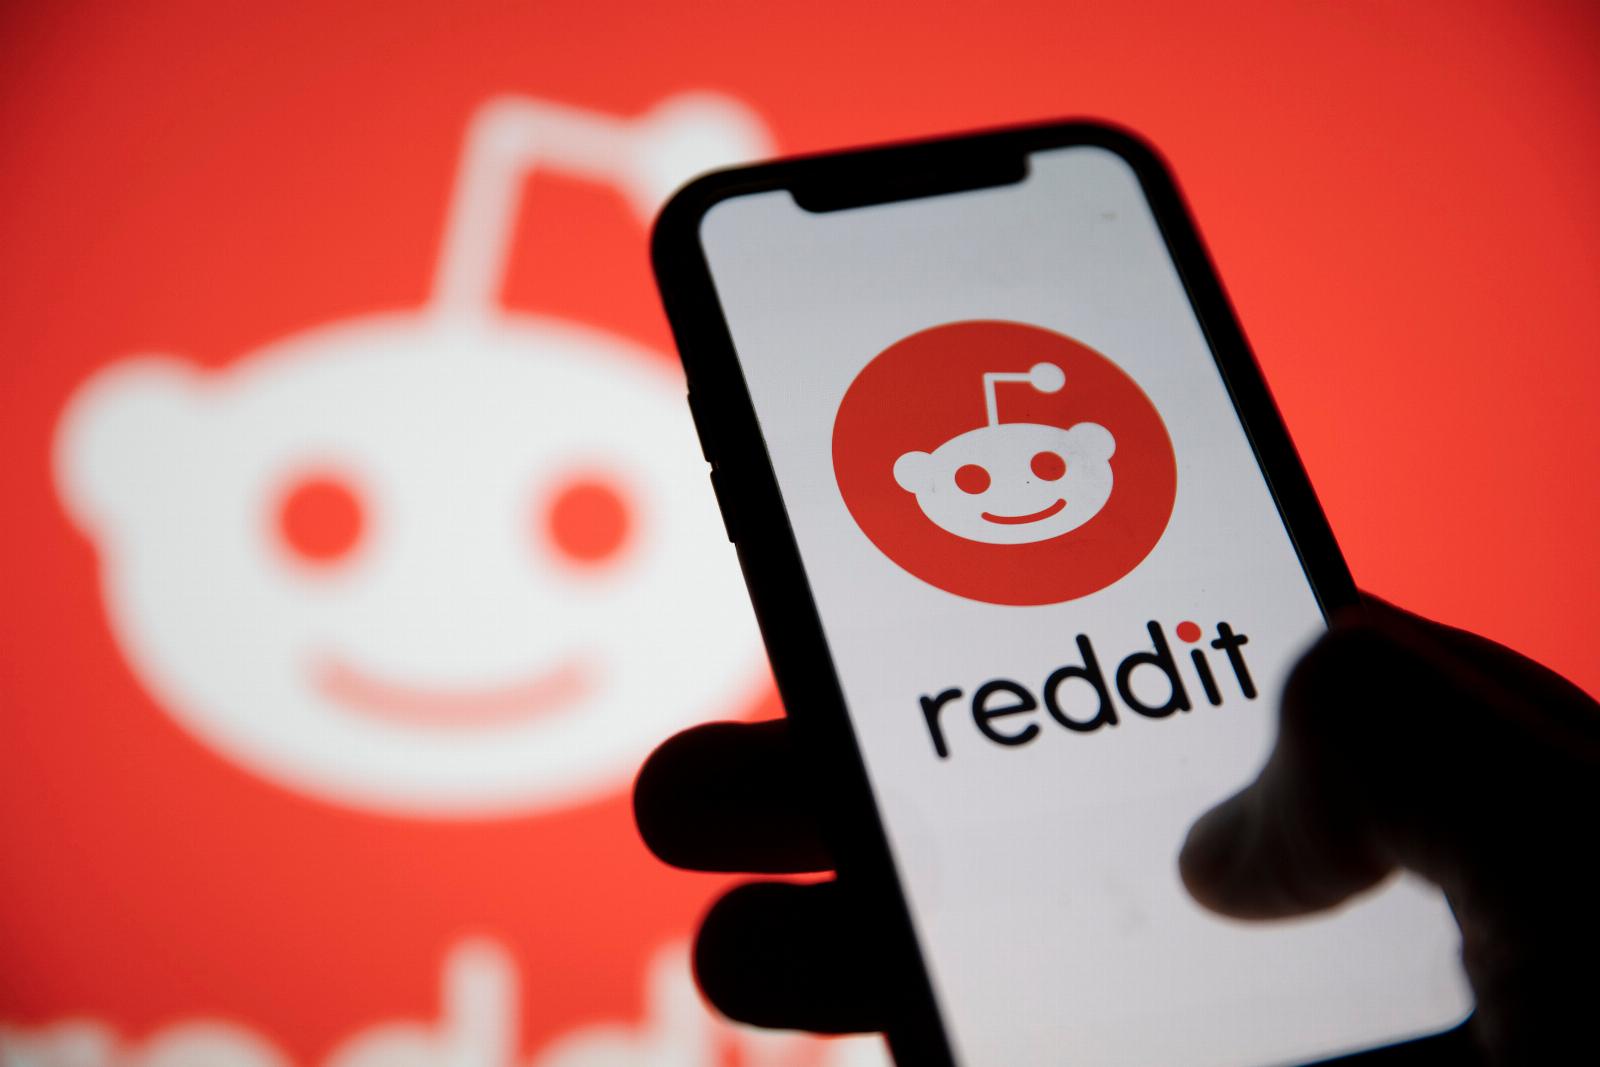 Reddit makes an exception for accessibility apps under new API terms